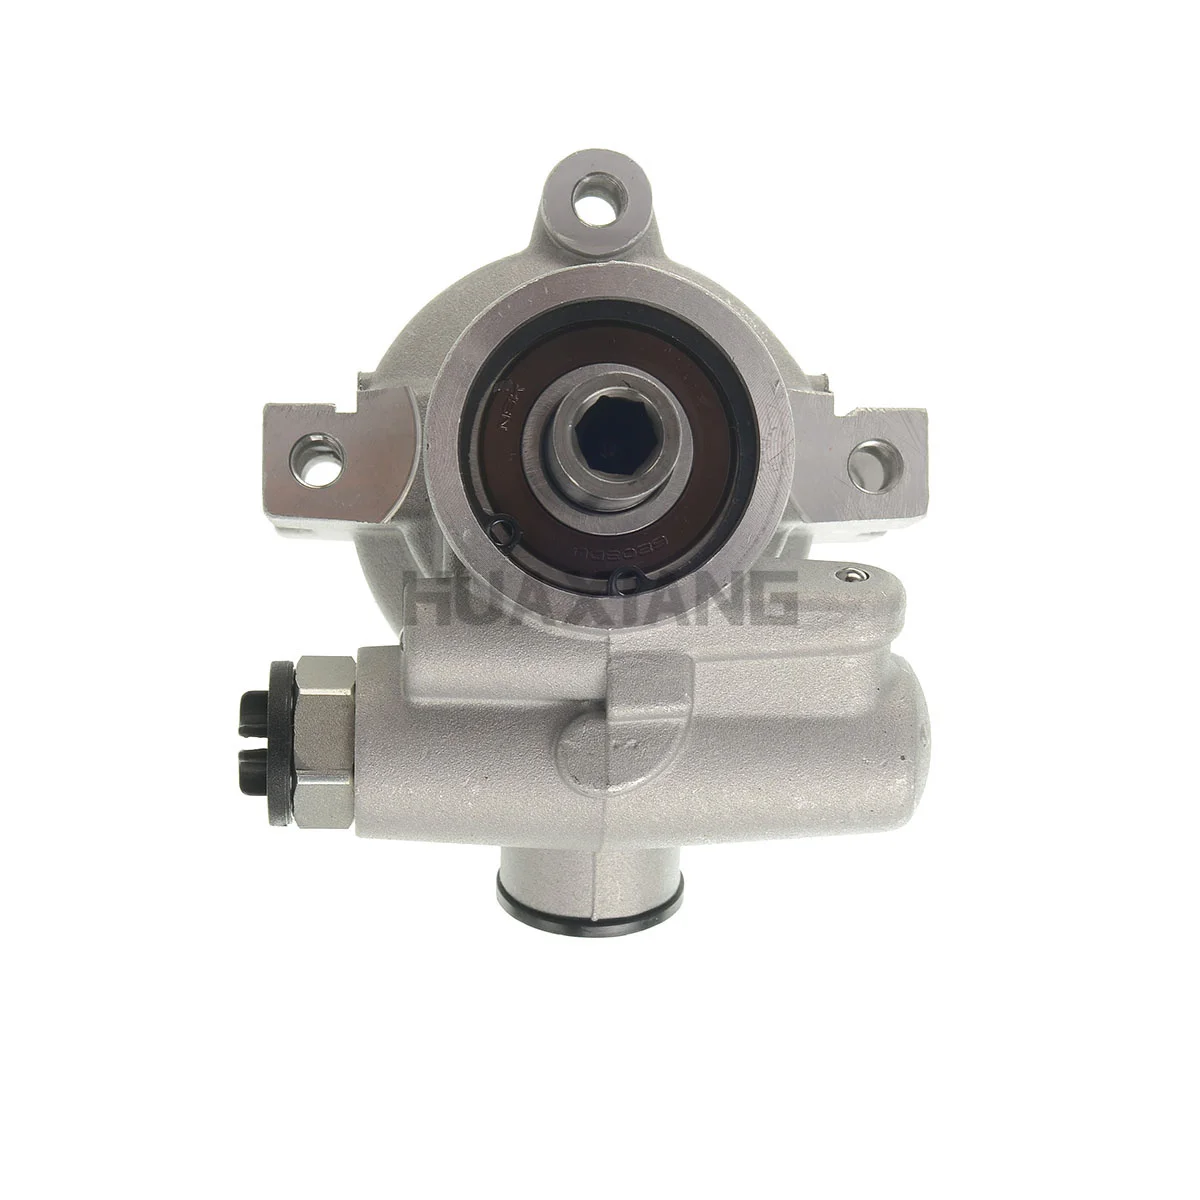 

CN US CA GMR New Power Steering Pump without Pulley for Volvo 850 960 C70 S70 V70 2.3L 2.4L 2.9L 35469071